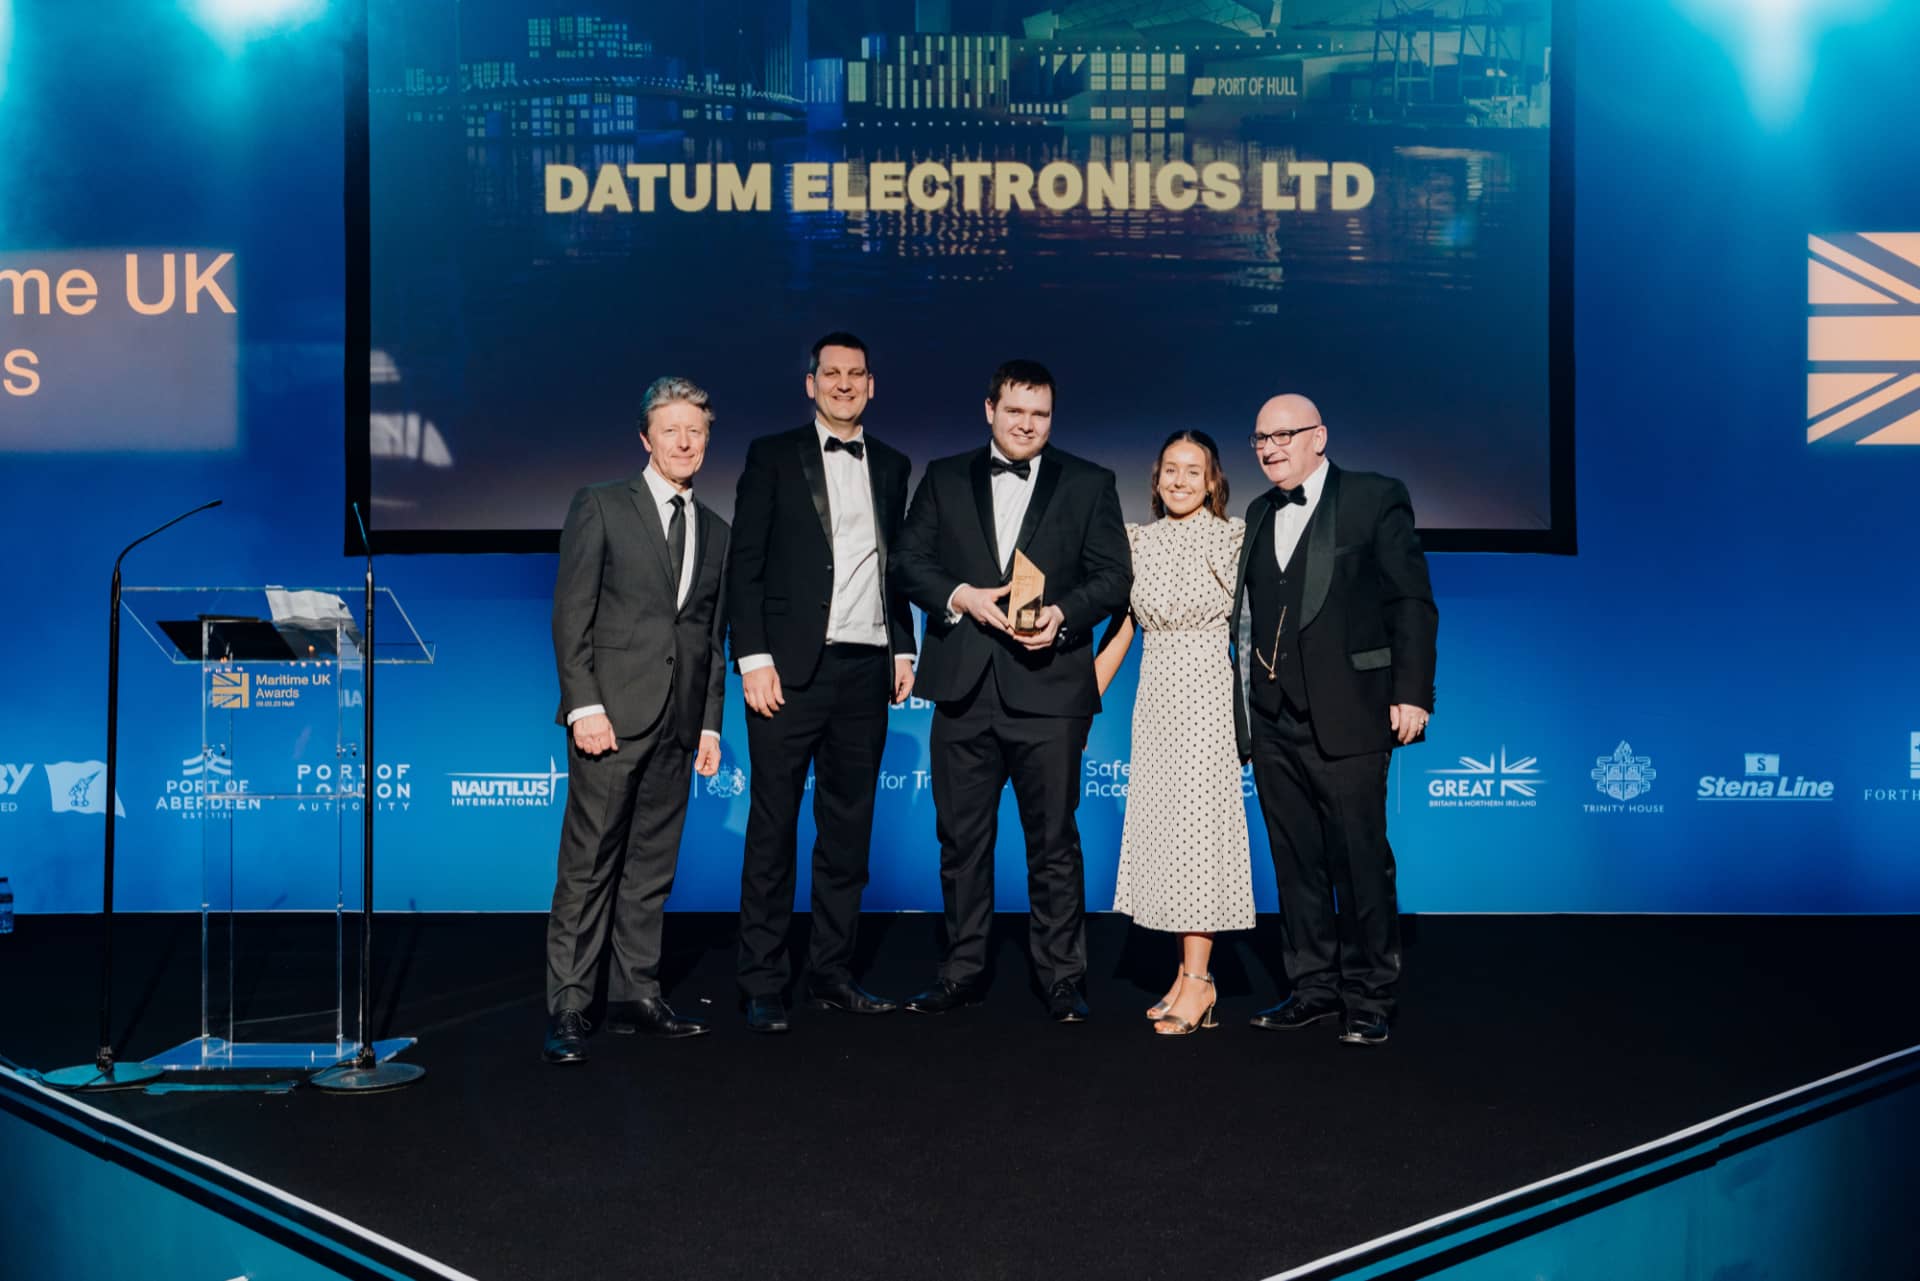 Datum Electronics Presented the Clean Maritime Enabler Award by Lloyd’s Register and BBC presenter Charlie Stayt